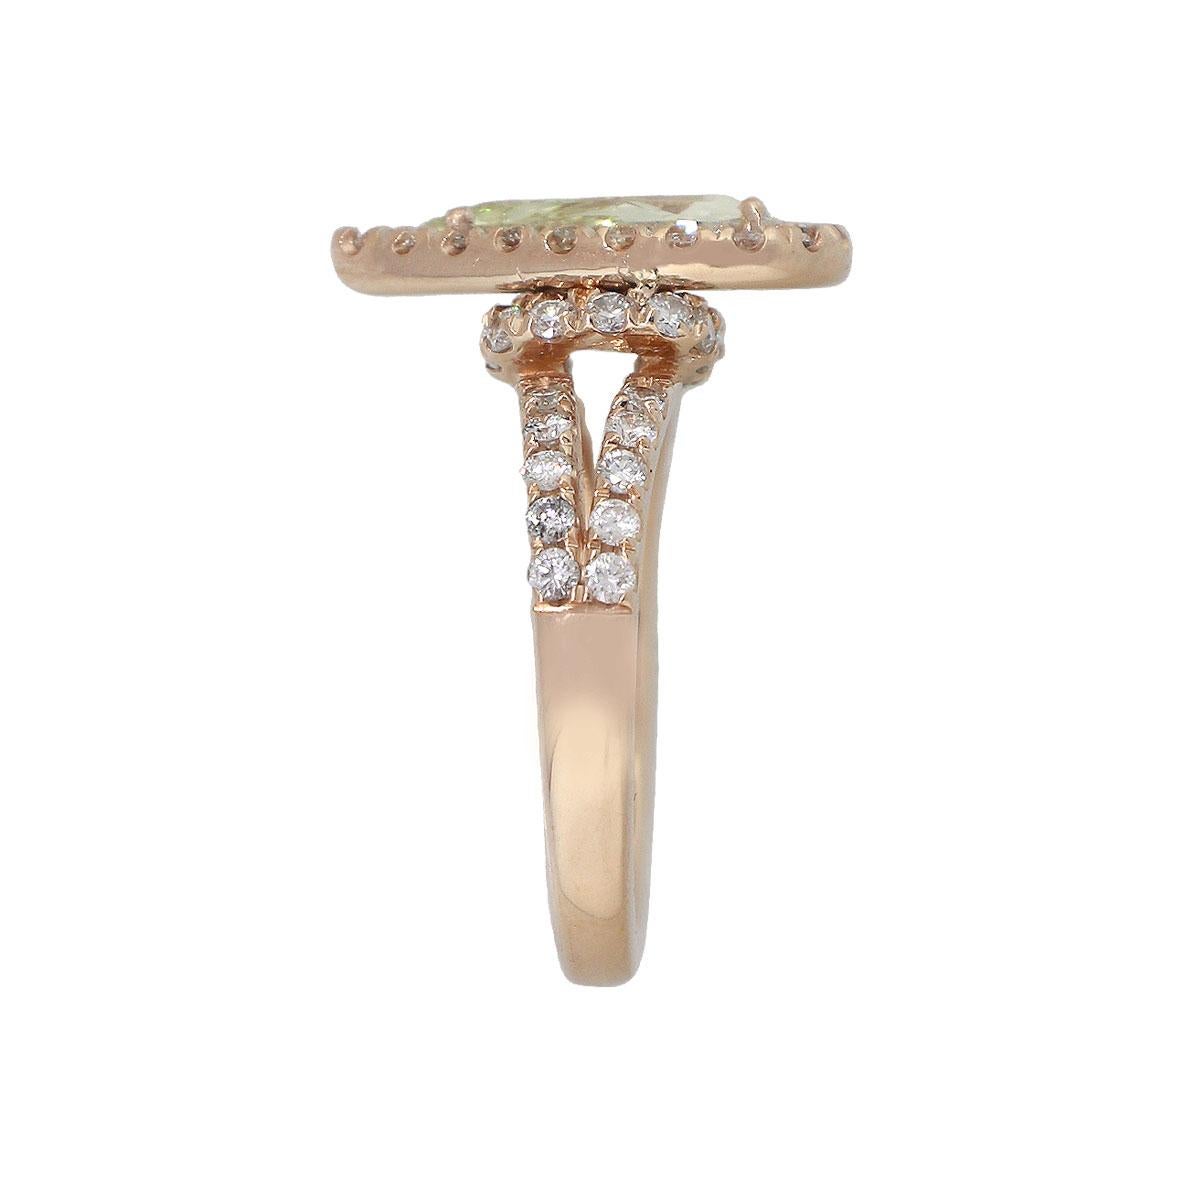 Material: 14k Rose Gold
Center Stone Details: Approx. 1.21ctw Pear Shape Diamond. Diamond is X/Y/Z in color and SI2 in clarity
Diamond Details: Approx. 1ctw of round cut diamonds. Diamonds are G/H in color and VS in clarity
Size: 6.25
Total Weight: